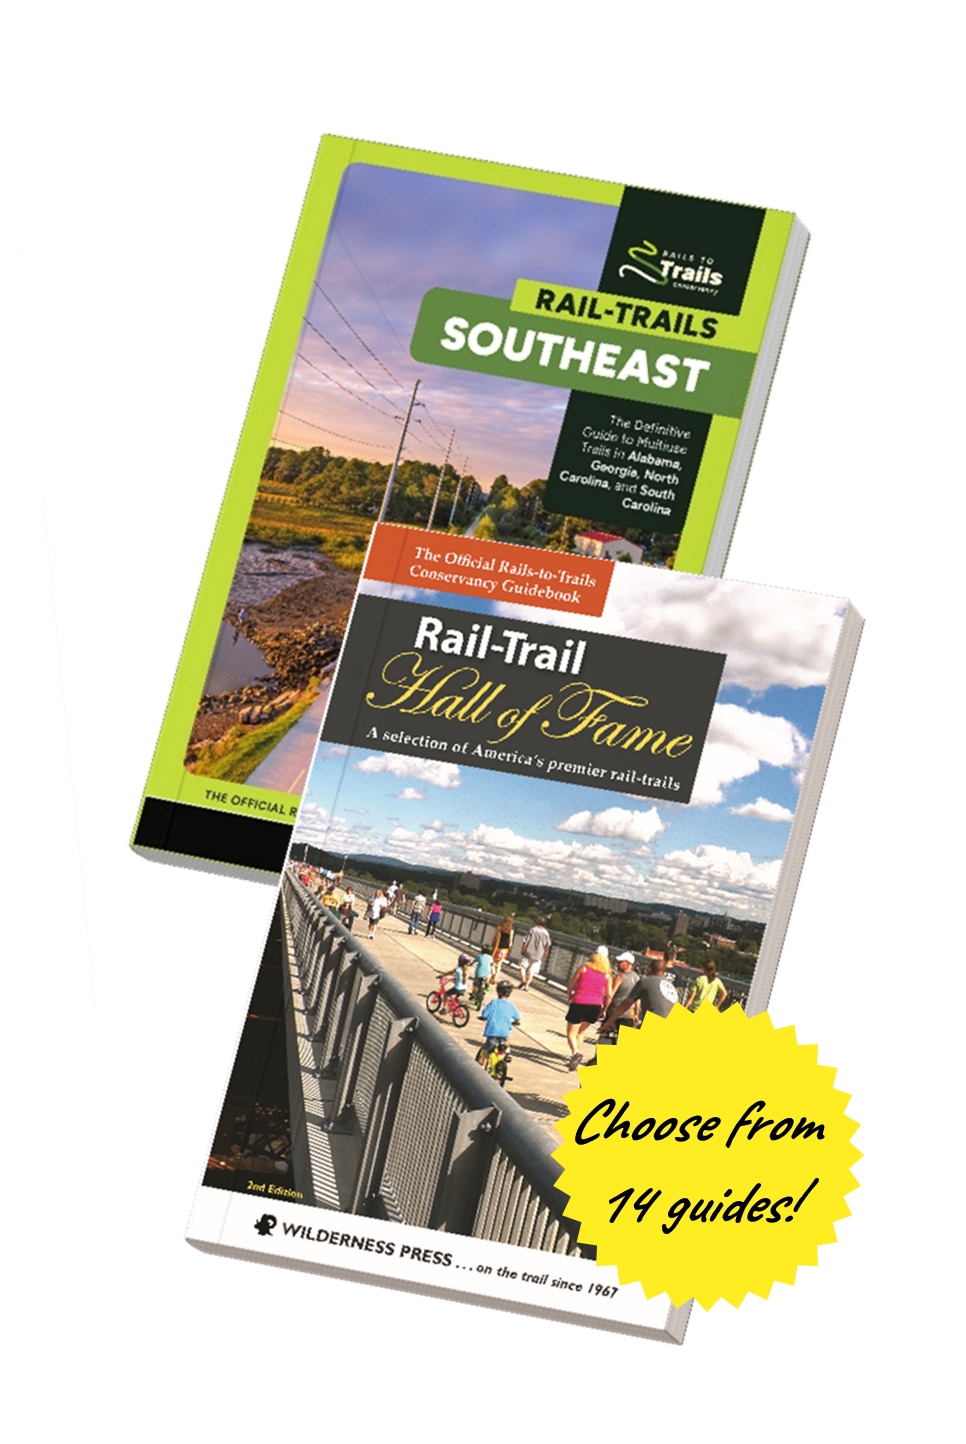 Choose from 14 trail guides, including our Hall of Fame guidebook and all-new Southeast guidebook.